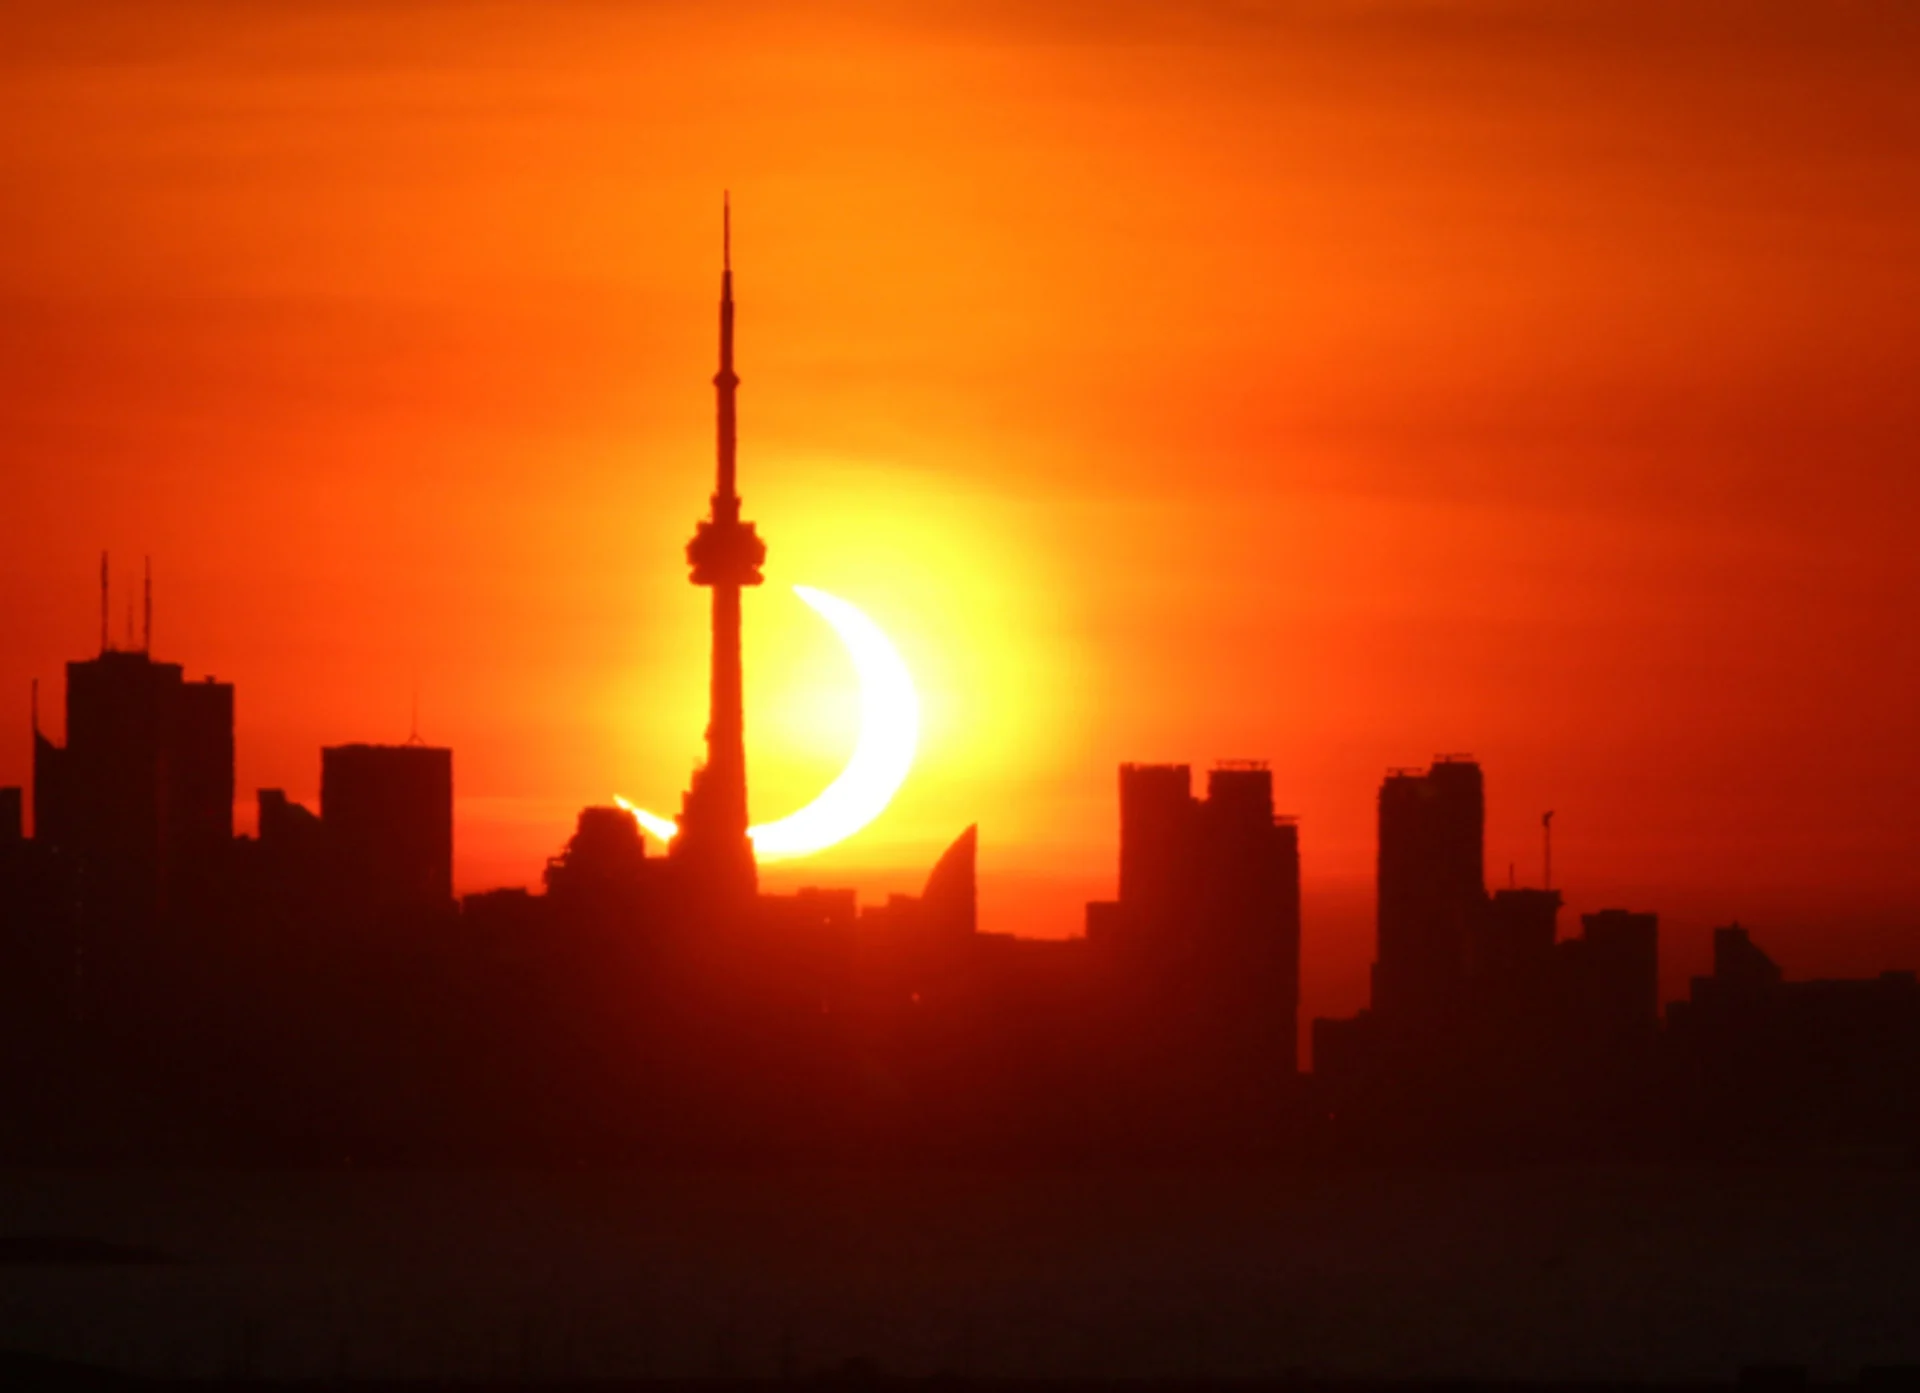 High heat over Atlantic Canada this week will pose a serious risk to vulnerable people. Here's why extreme heat is such a deadly threat